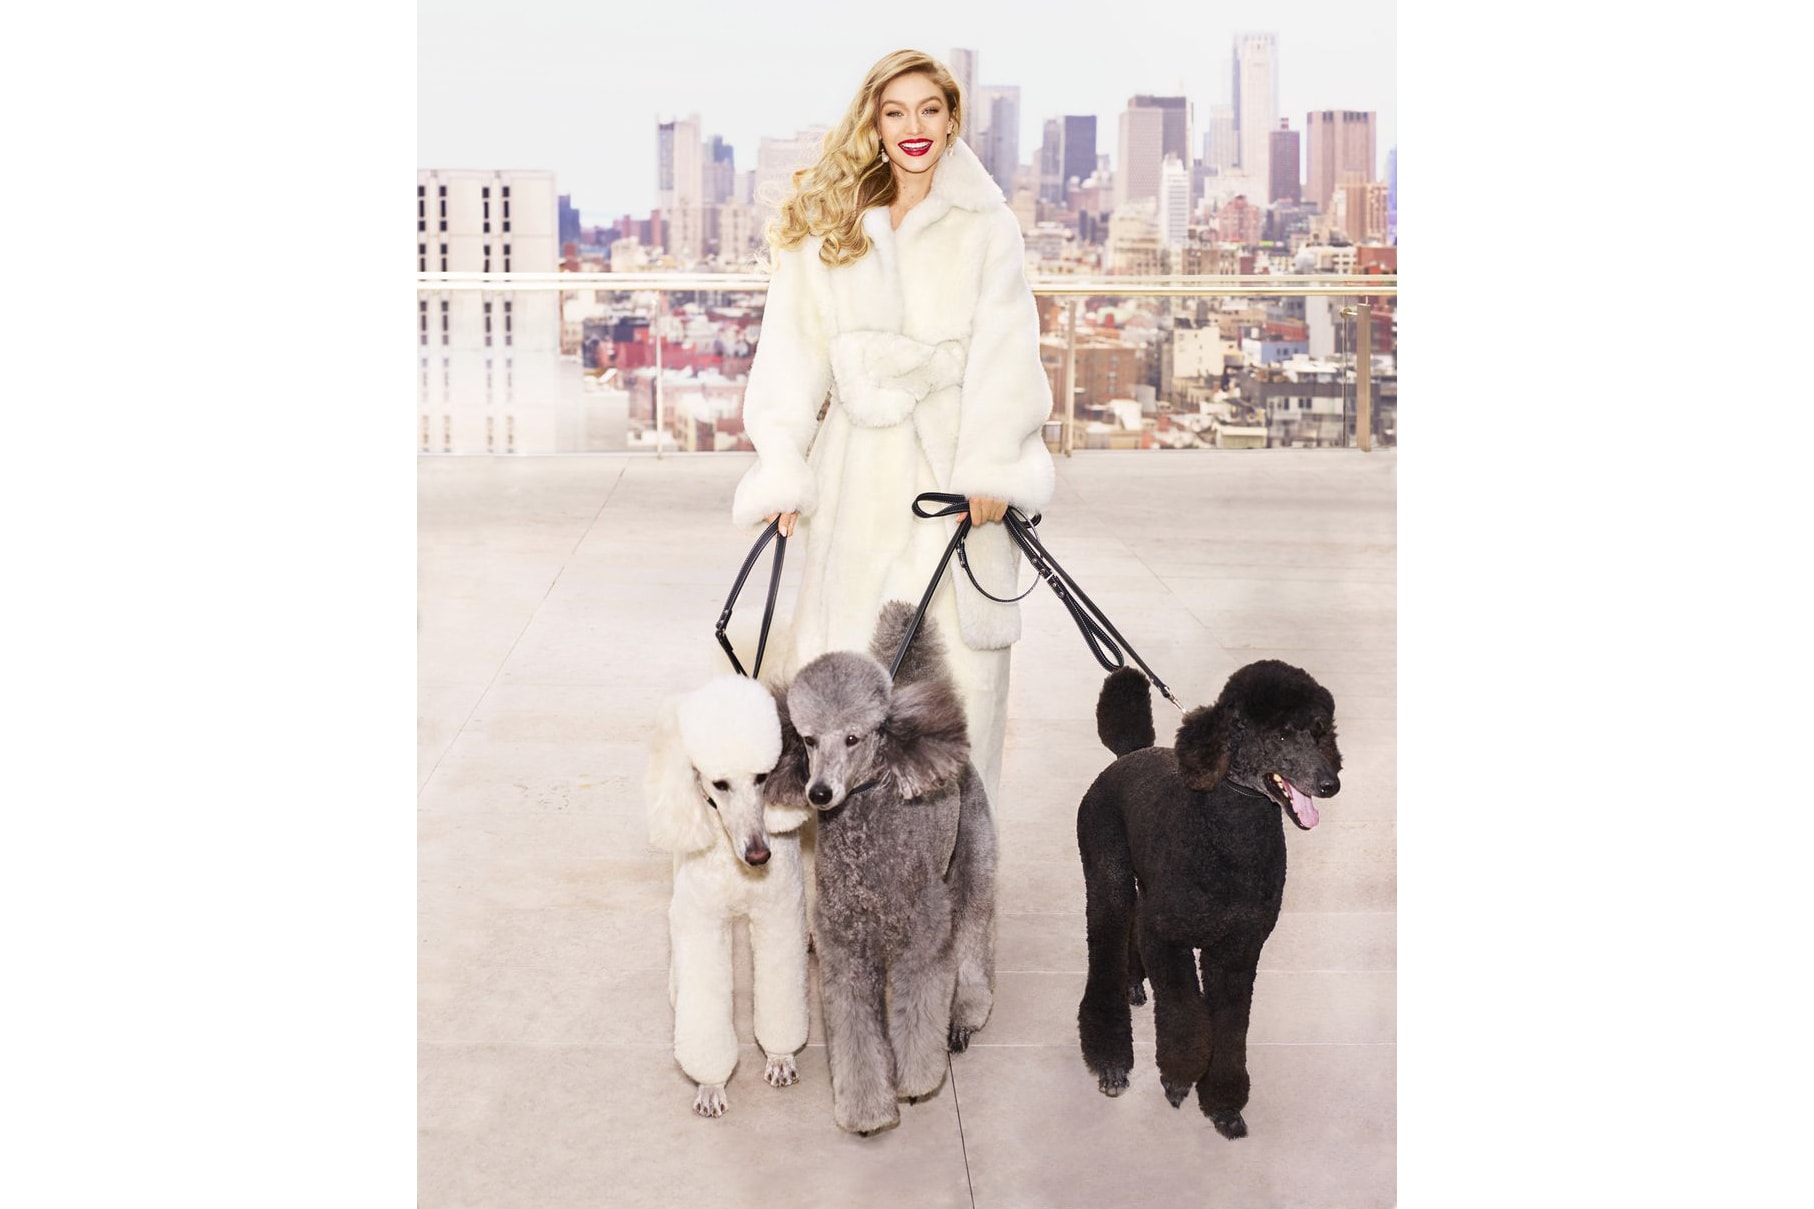 Gigi Hadid Harper's Bazaar May 2018 Issue Cover Editorial Magazine Dogs Puppies Poodle Interview Blake Lively Body Shamers Haters Instagram Social Media Trolls Woman Supporting